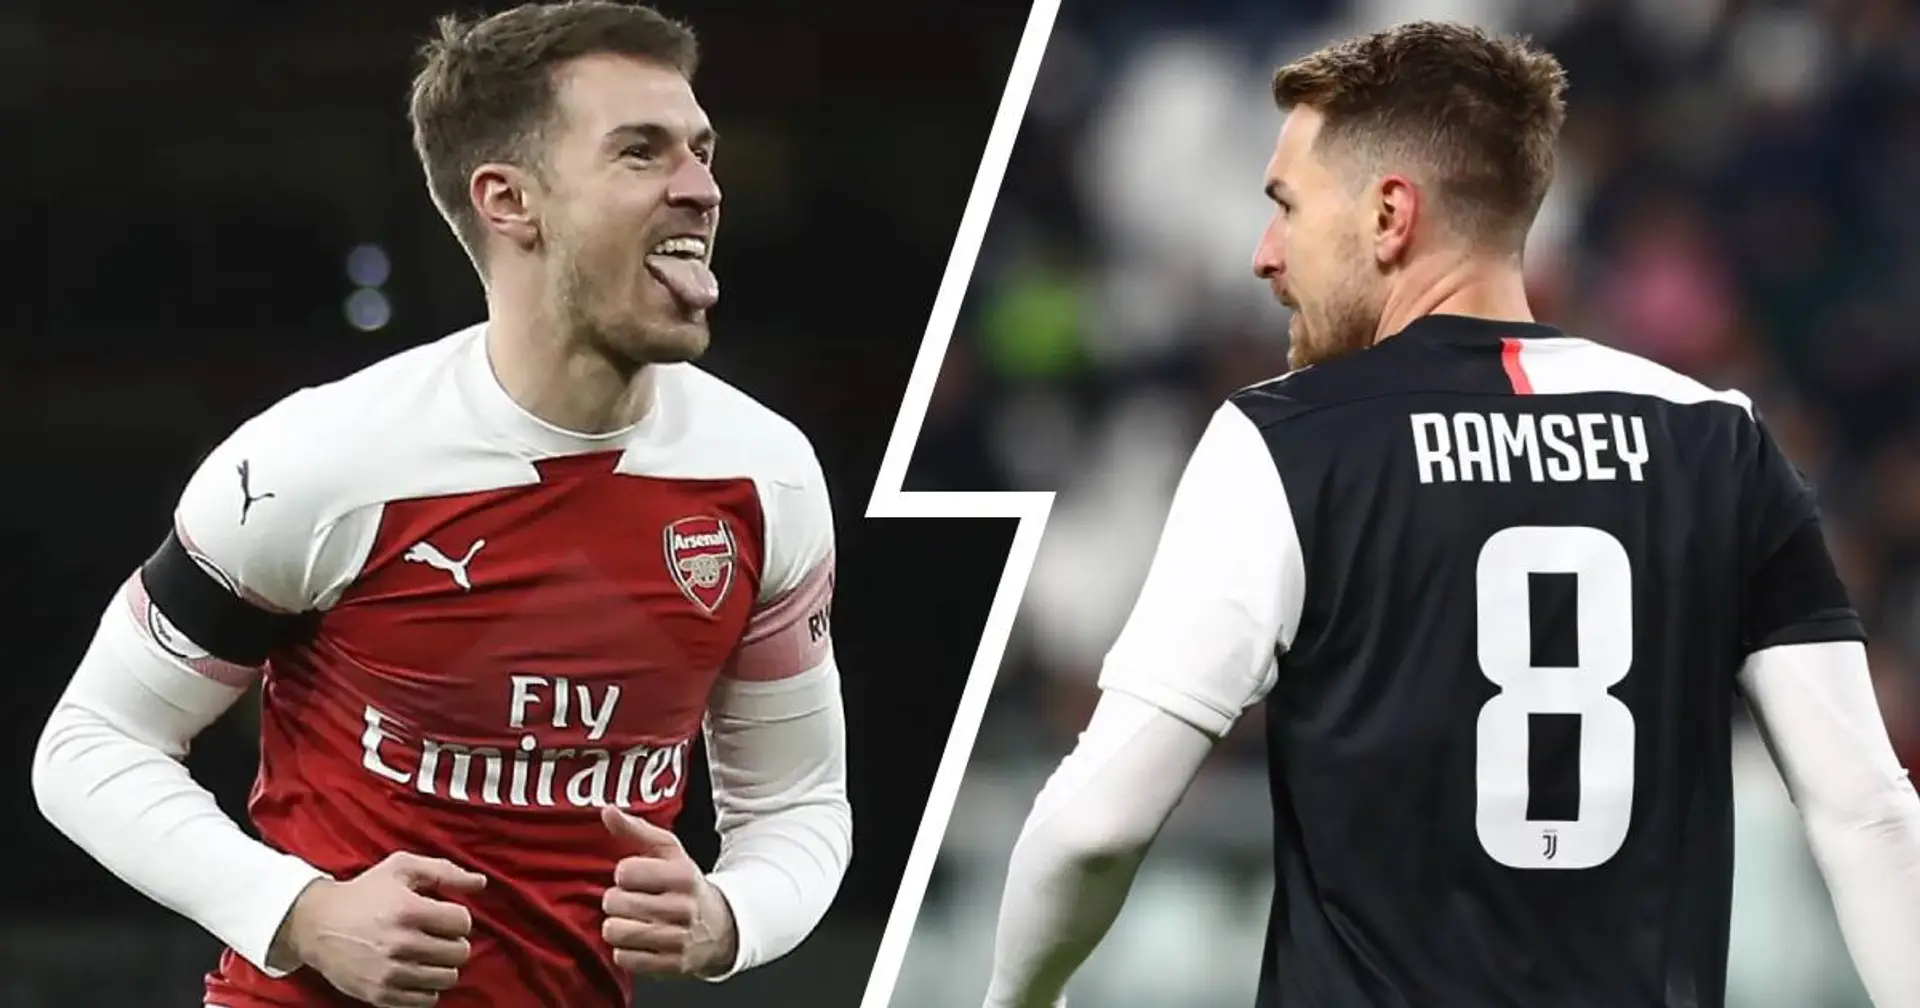 'Would be a good replacement for Xhaka', 'We should move forward': fans weigh up Ramsey's possible return